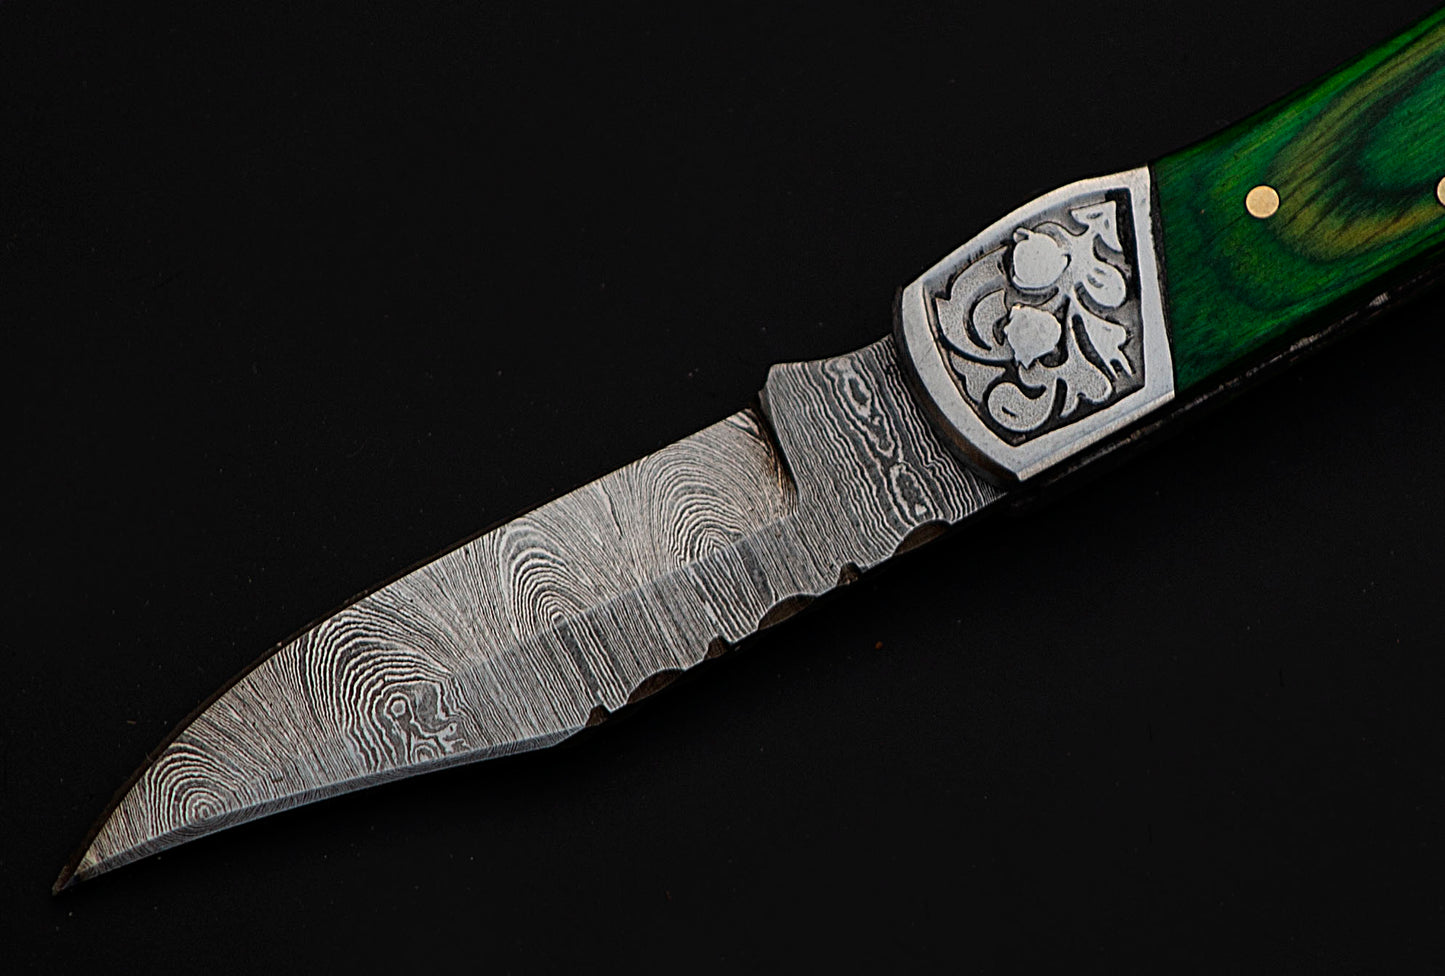 7" long back lock Folding Knife, Green colored wood Scale with Engraved steel bolster, custom made 3.25" Hand Forged Damascus steel blade, Cow hide leather sheath with belt loop